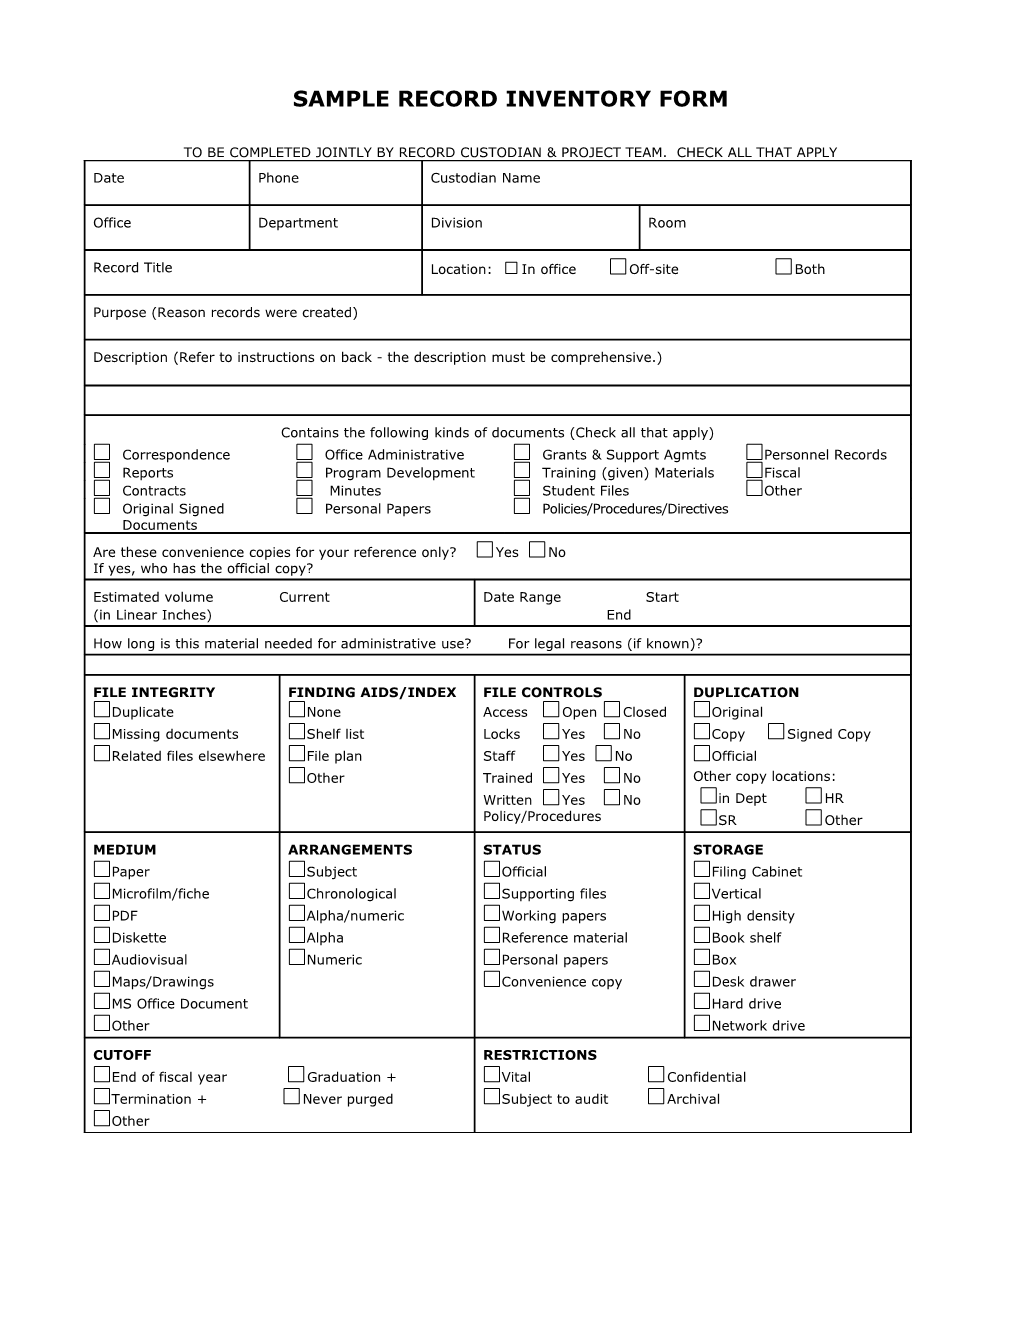 Sample Record Inventory Form